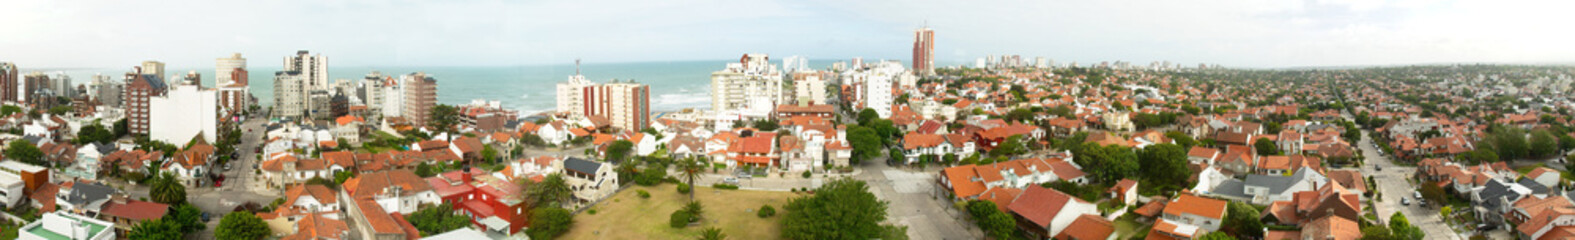 Panoramic view of a residential area by the sea. Mar del Plata, Buenos Aires, Argentina